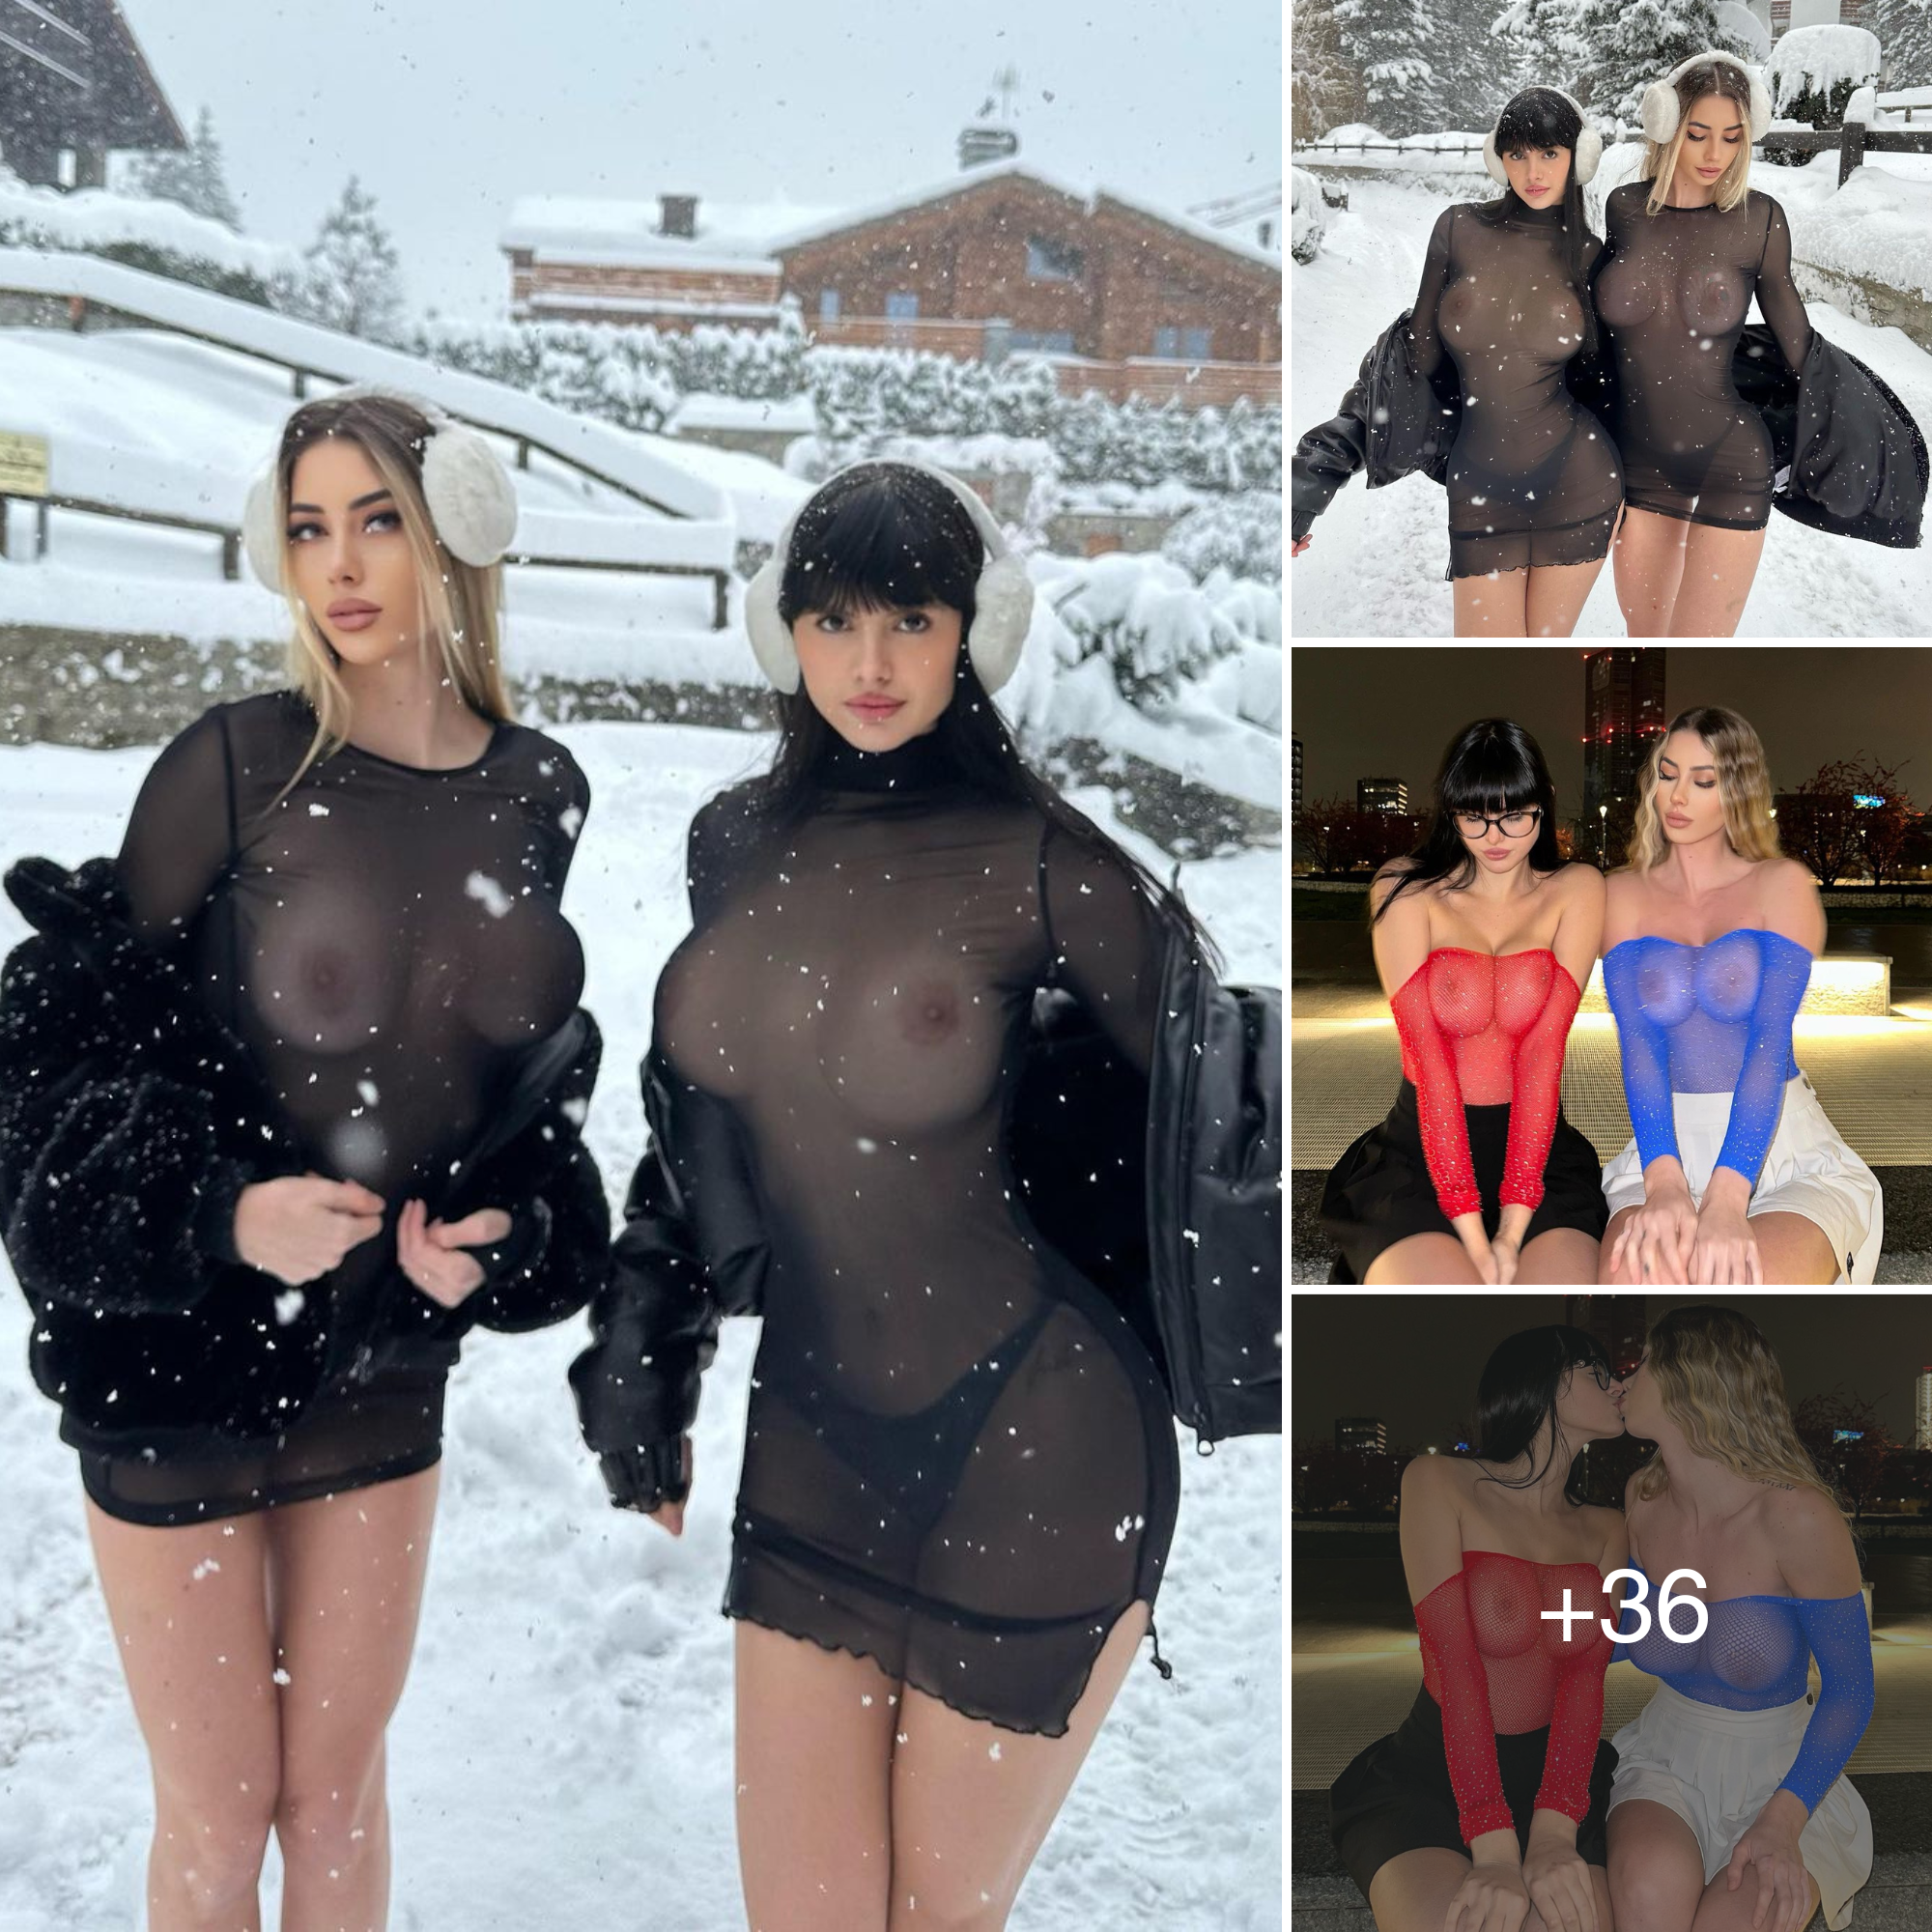 my. Martina Vismara with her friends in see-through outfits!